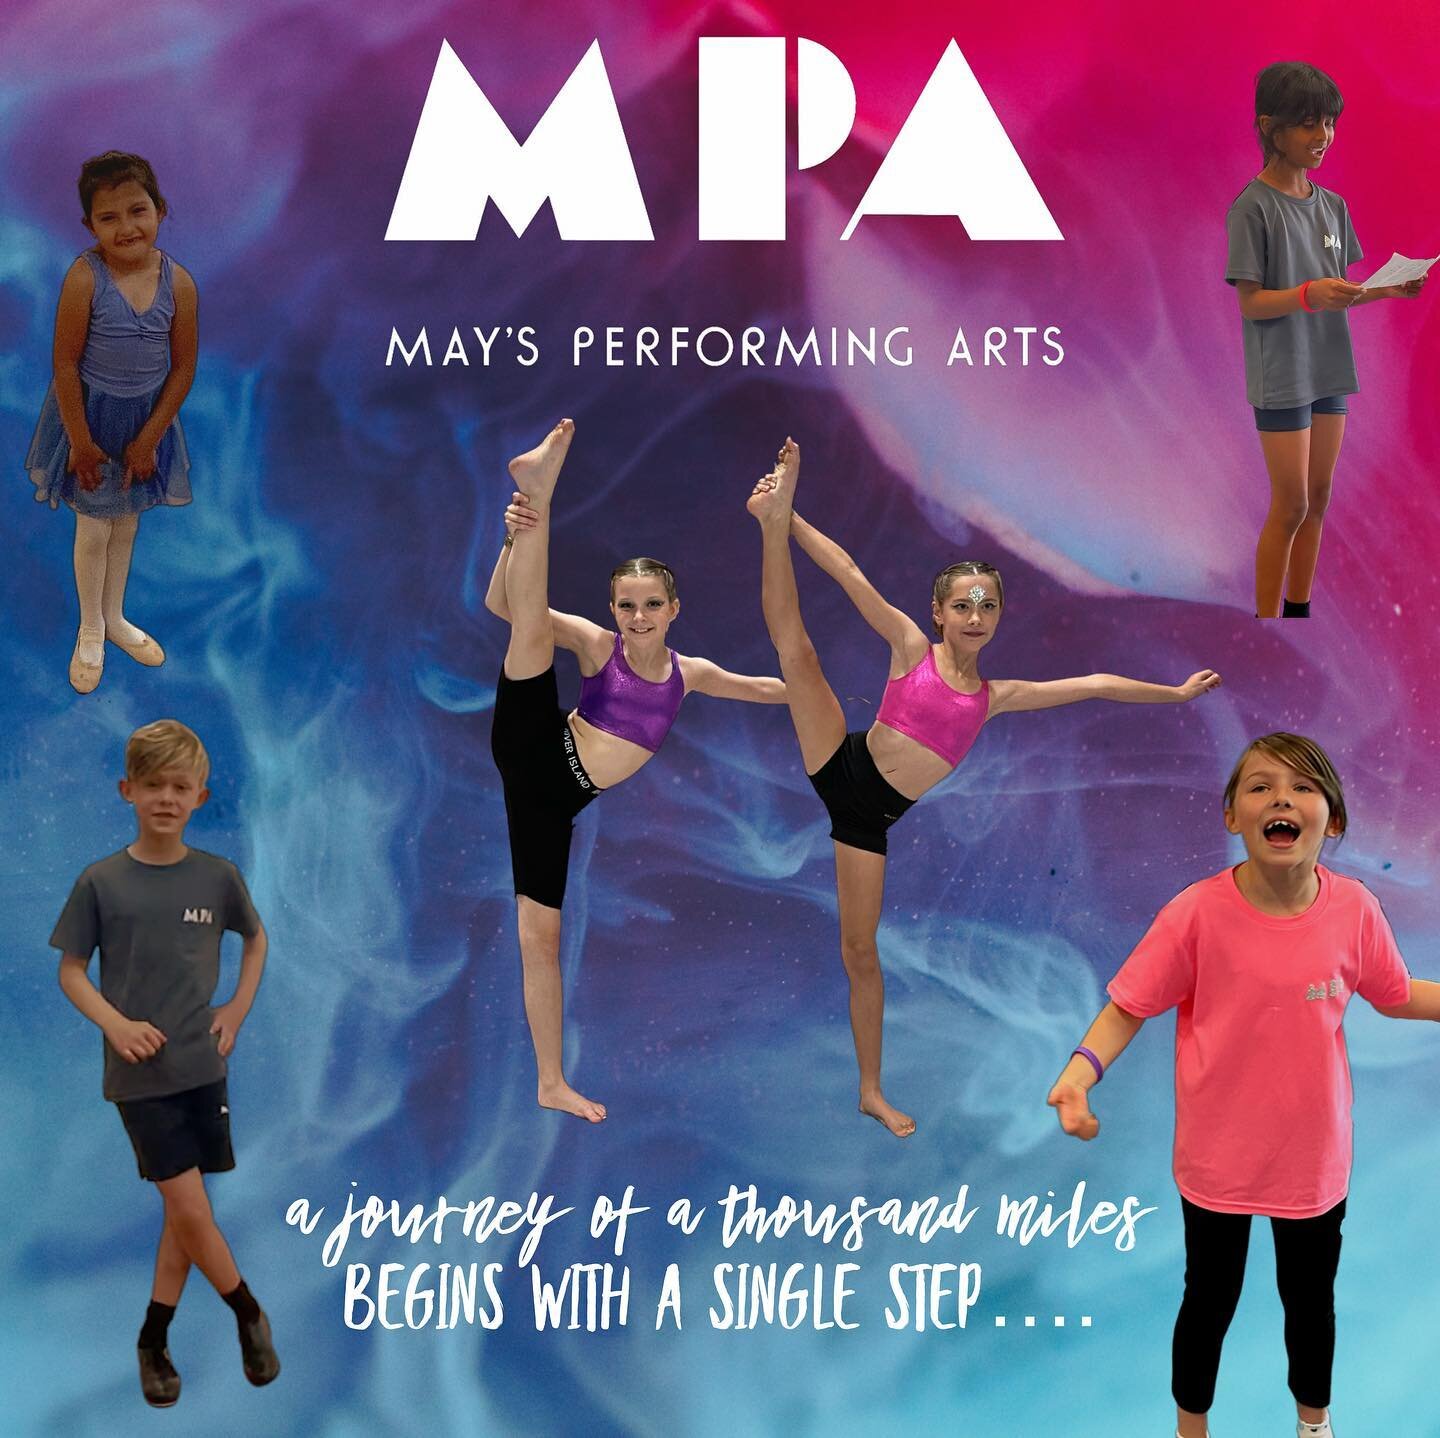 ⏰ The count down is on until we are back for our new term ✨✨

NEW CLASS ALERT⚠️ 
- LAMDA (Acting &amp; Musical Theatre Ages 8+)
- BEGINNERS STRETCH &amp; FLEXIBILITY (Ages7+)

☑️ Book your Free Trial &amp; Enrol onto your classes here: www.maysperfor